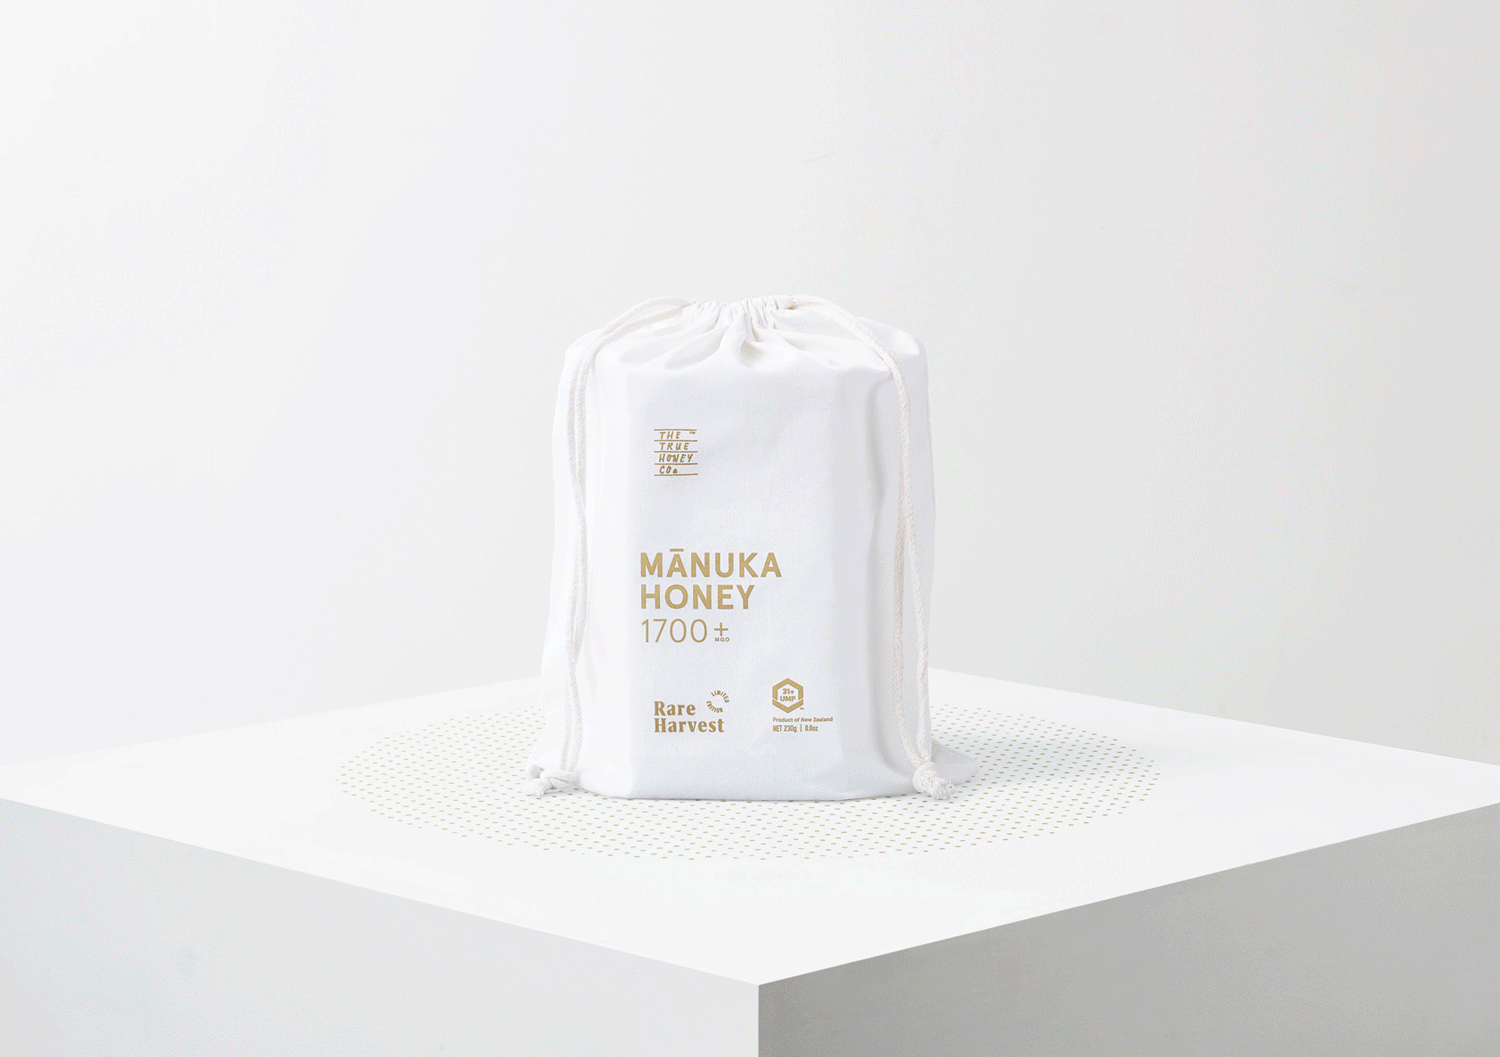 New packaging by Marx Design for Rare Havest, a limited edition Mānuka honey from The True Honey Company